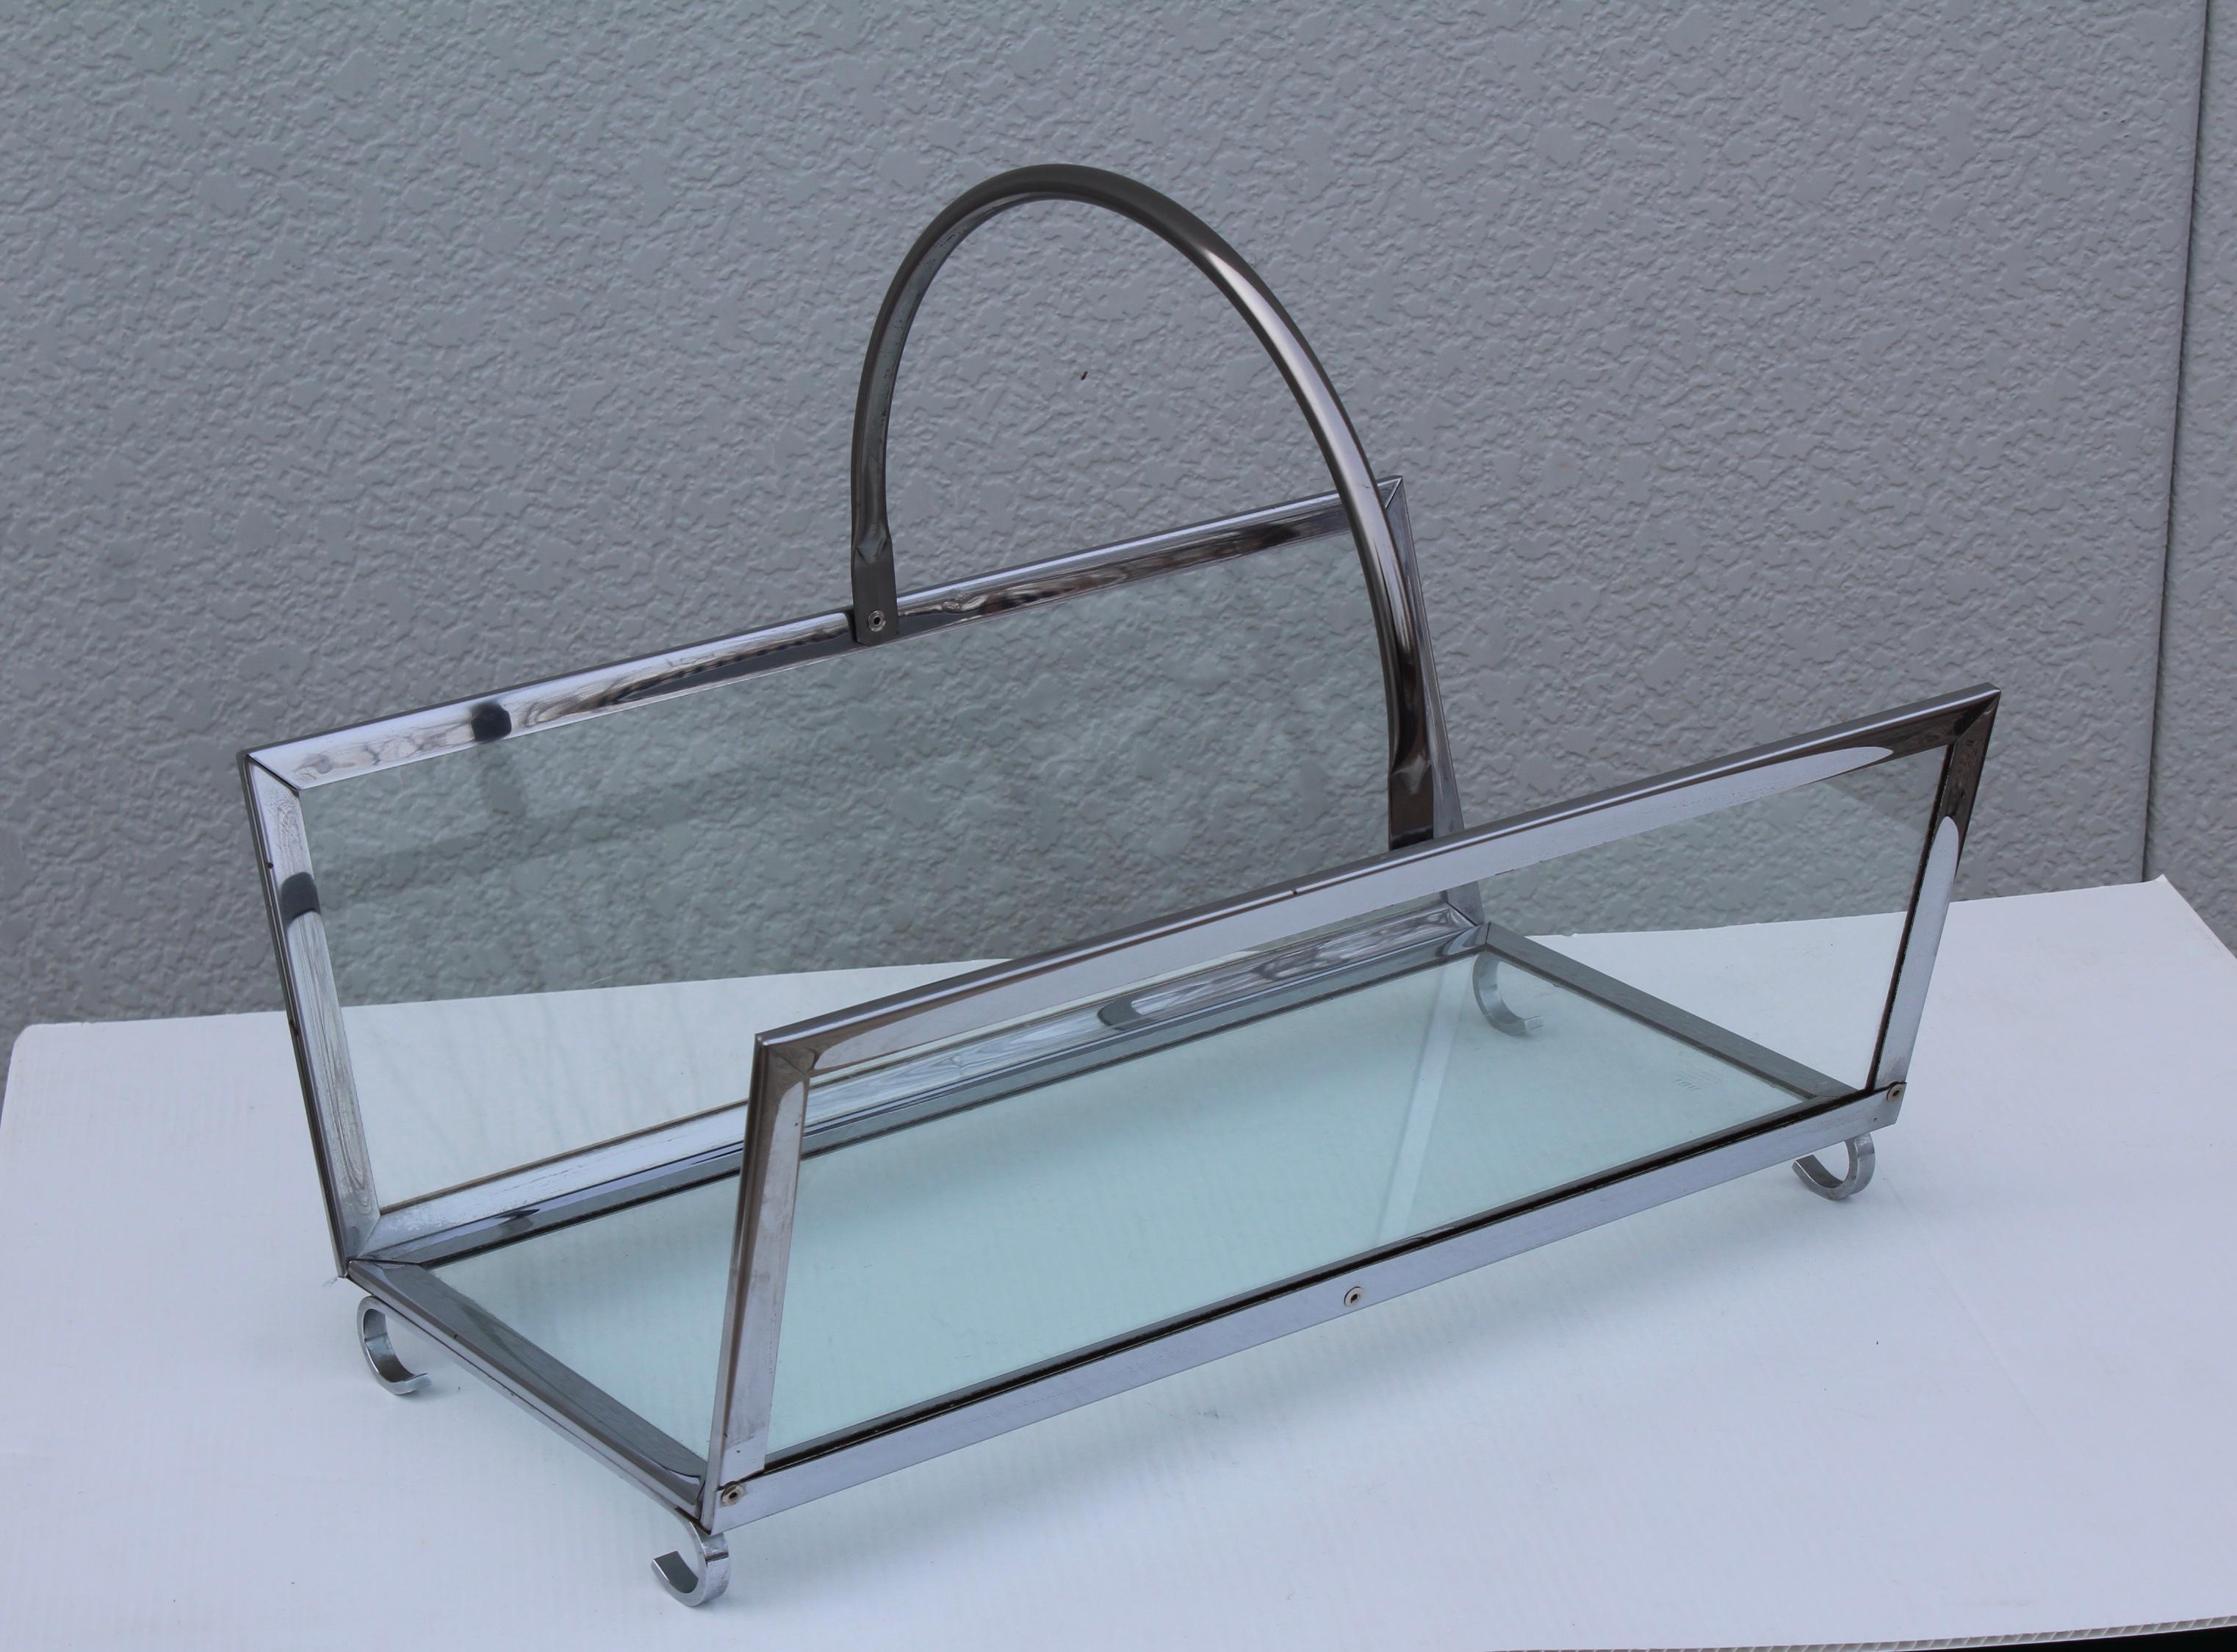 1970s modern chrome and glass log holder with scrolled feet, well made and very heavy. 

Measures: Height including handle 16